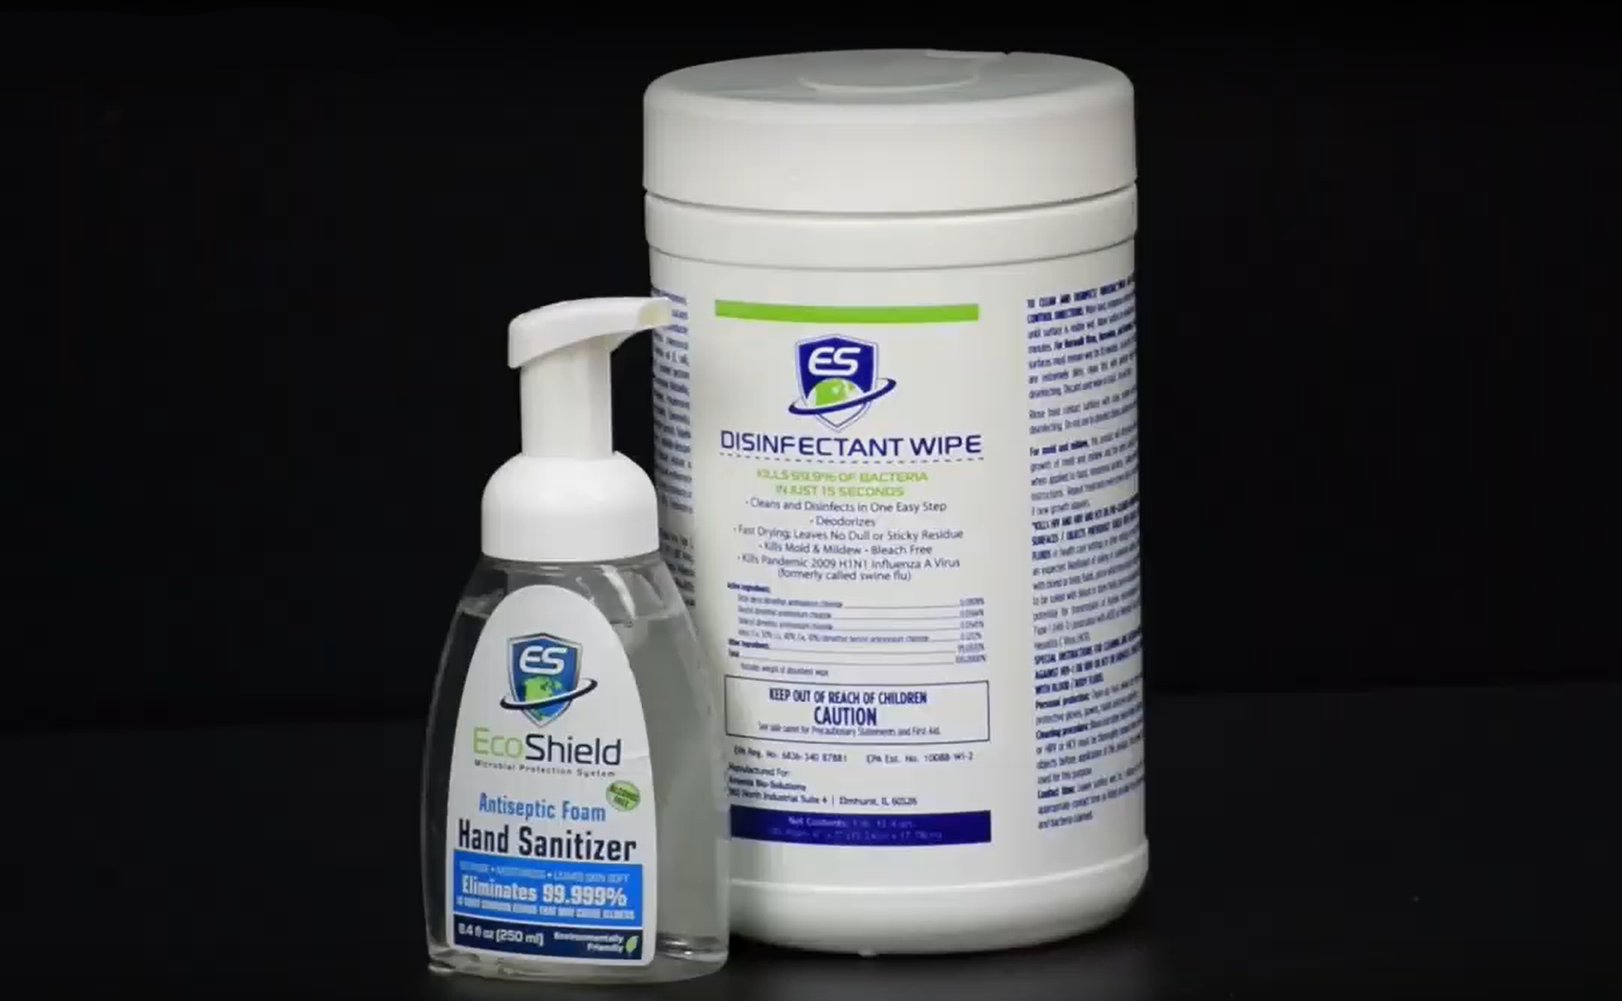 Hand Sanitizer and Disinfectant Wipes